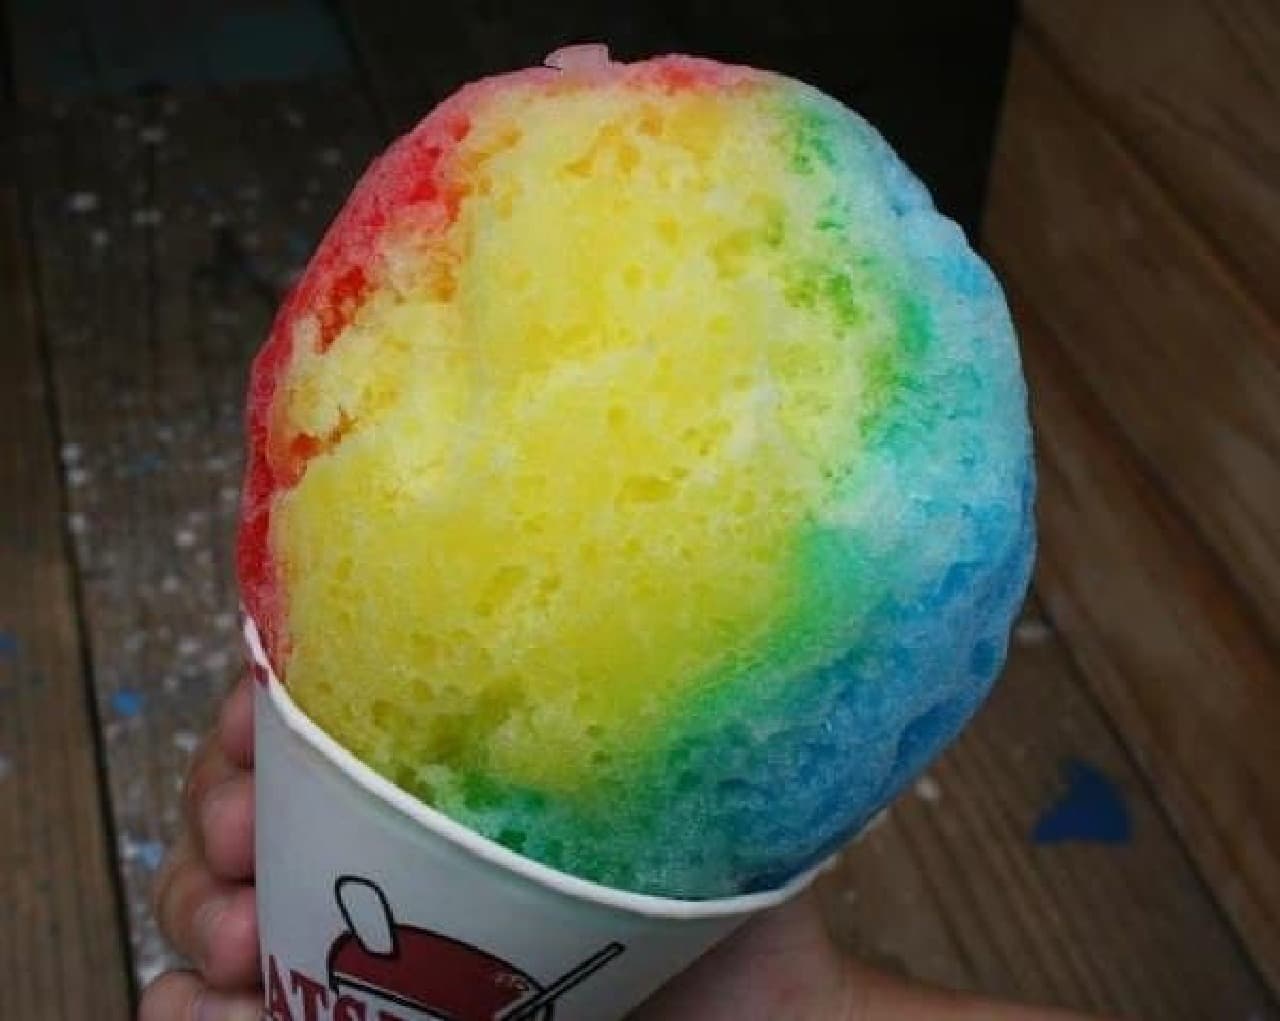 From Hawaii! Let's taste 7 colors of shaved ice "Matsumoto Shave Ice" in Shibuya